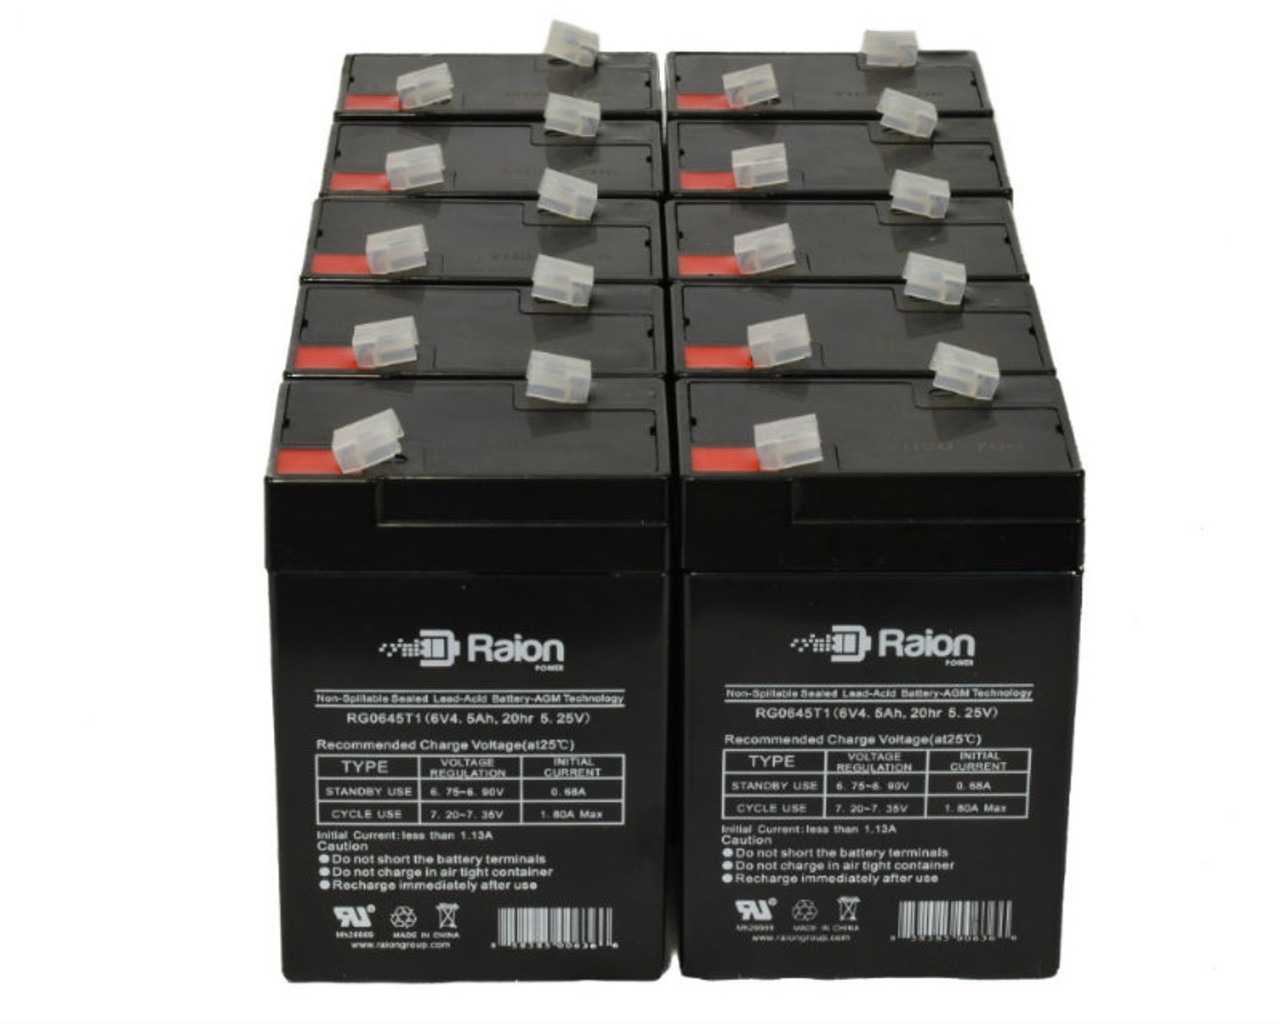 Raion Power 6V 4.5Ah Replacement Emergency Light Battery for IBT BT4-6 - 10 Pack